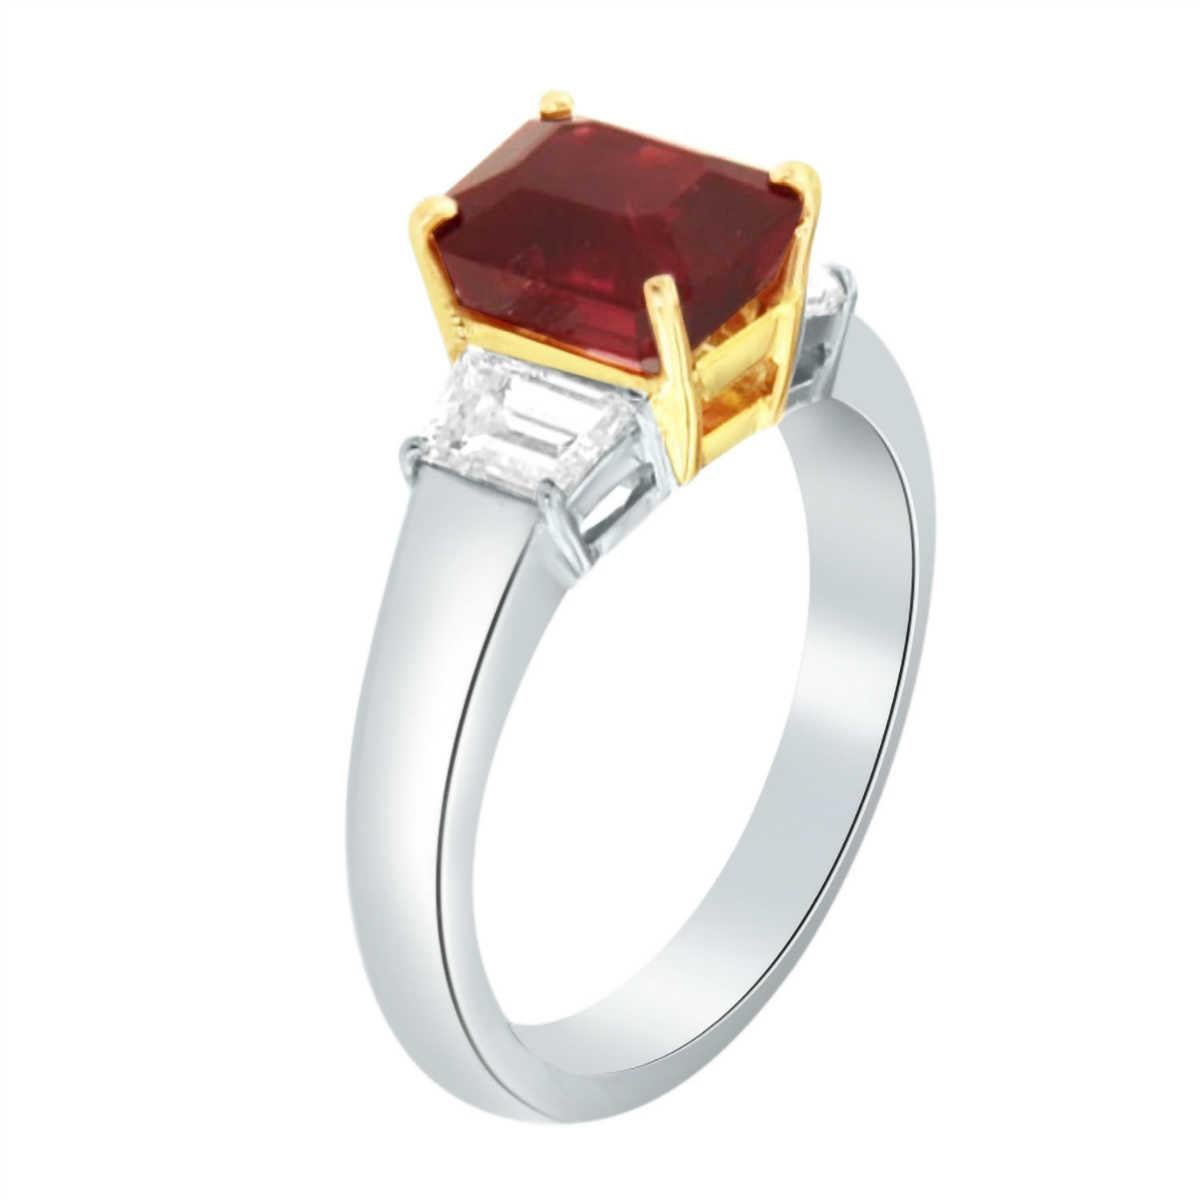 This 18K Two-Tone handcrafted Women's trilogy ring showcases a one-of-a-kind GIA Certified Emerald Cut Ruby accompanied by two (2) Trapezoid Cut diamonds on each side.

Centerstone Weight: 3.36 Carats
Side Diamond Weight: 0.90 Carats
Diamond Color: